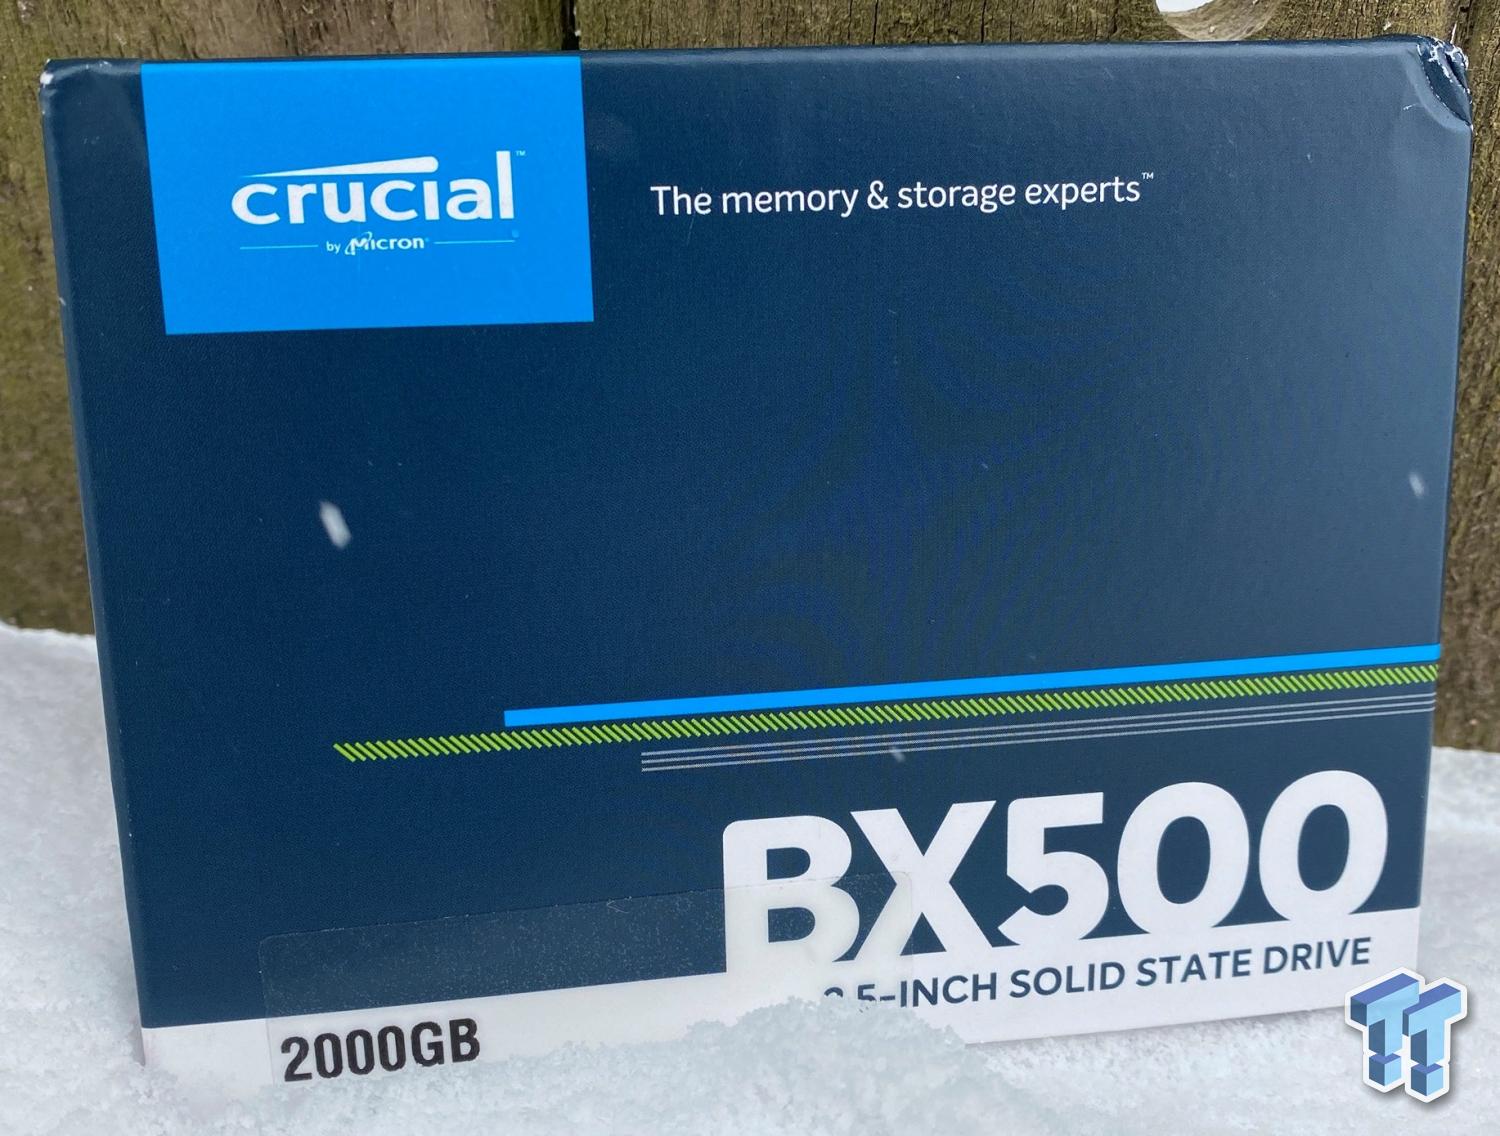 Crucial BX500 SSD Review